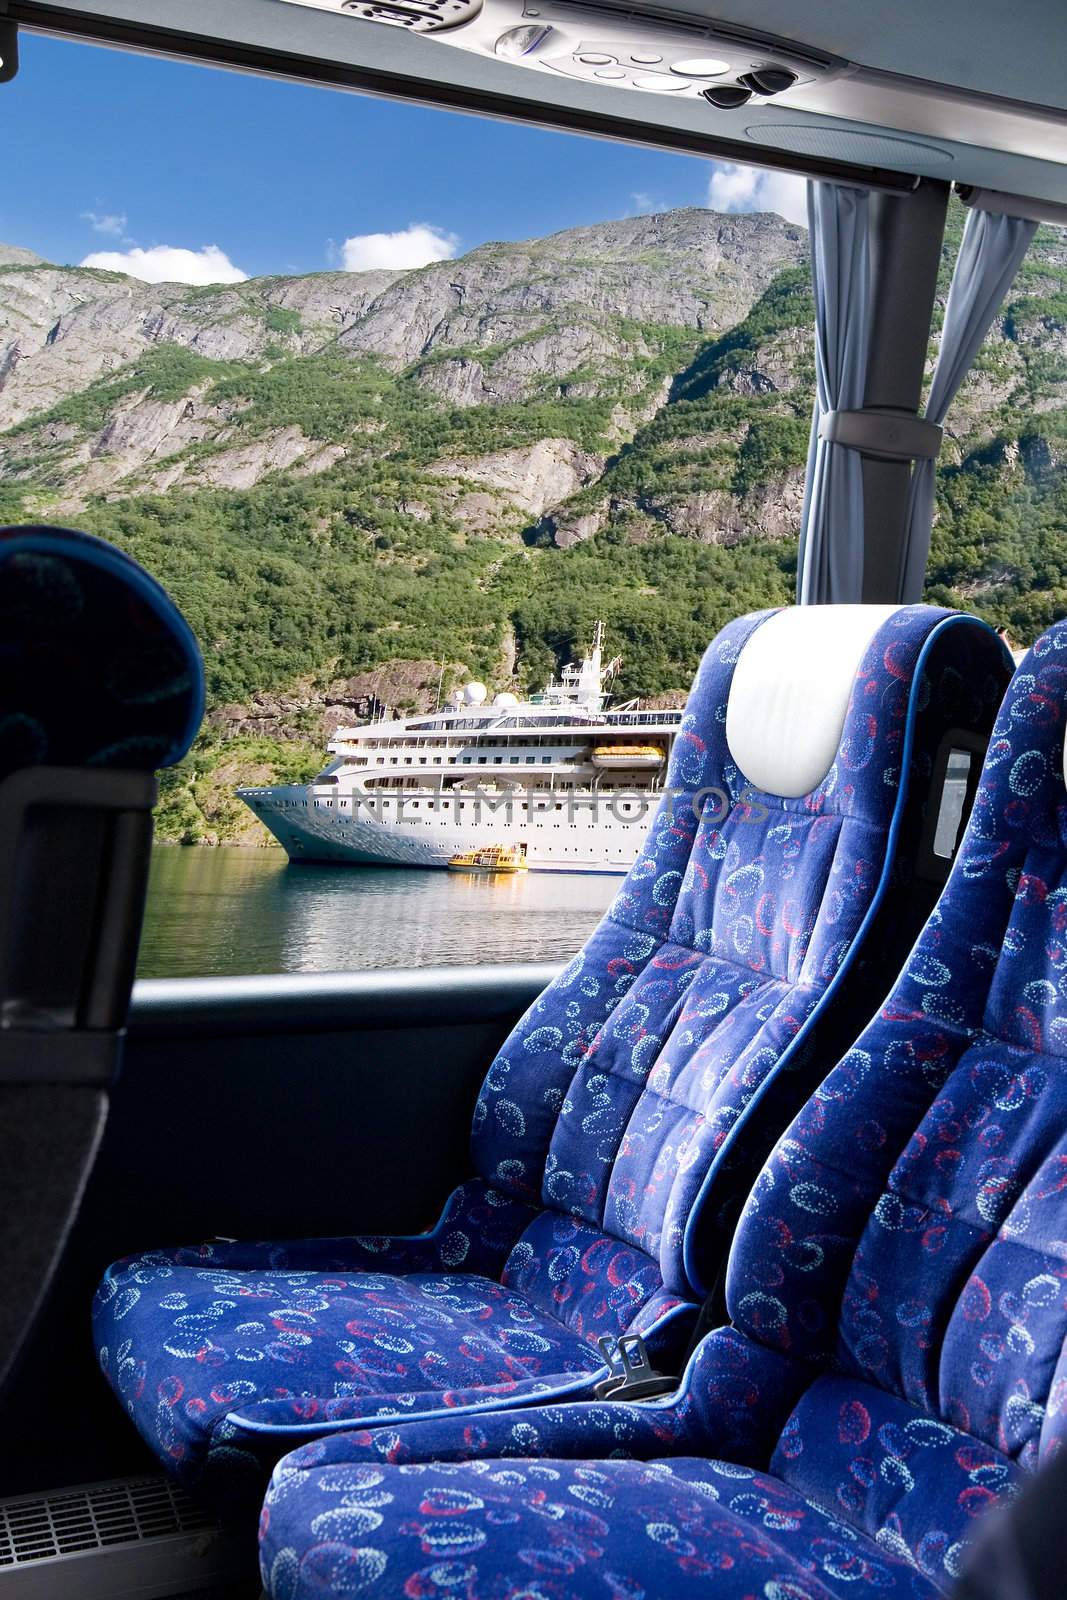 Norwegian Fjord Bus Tour by leaf